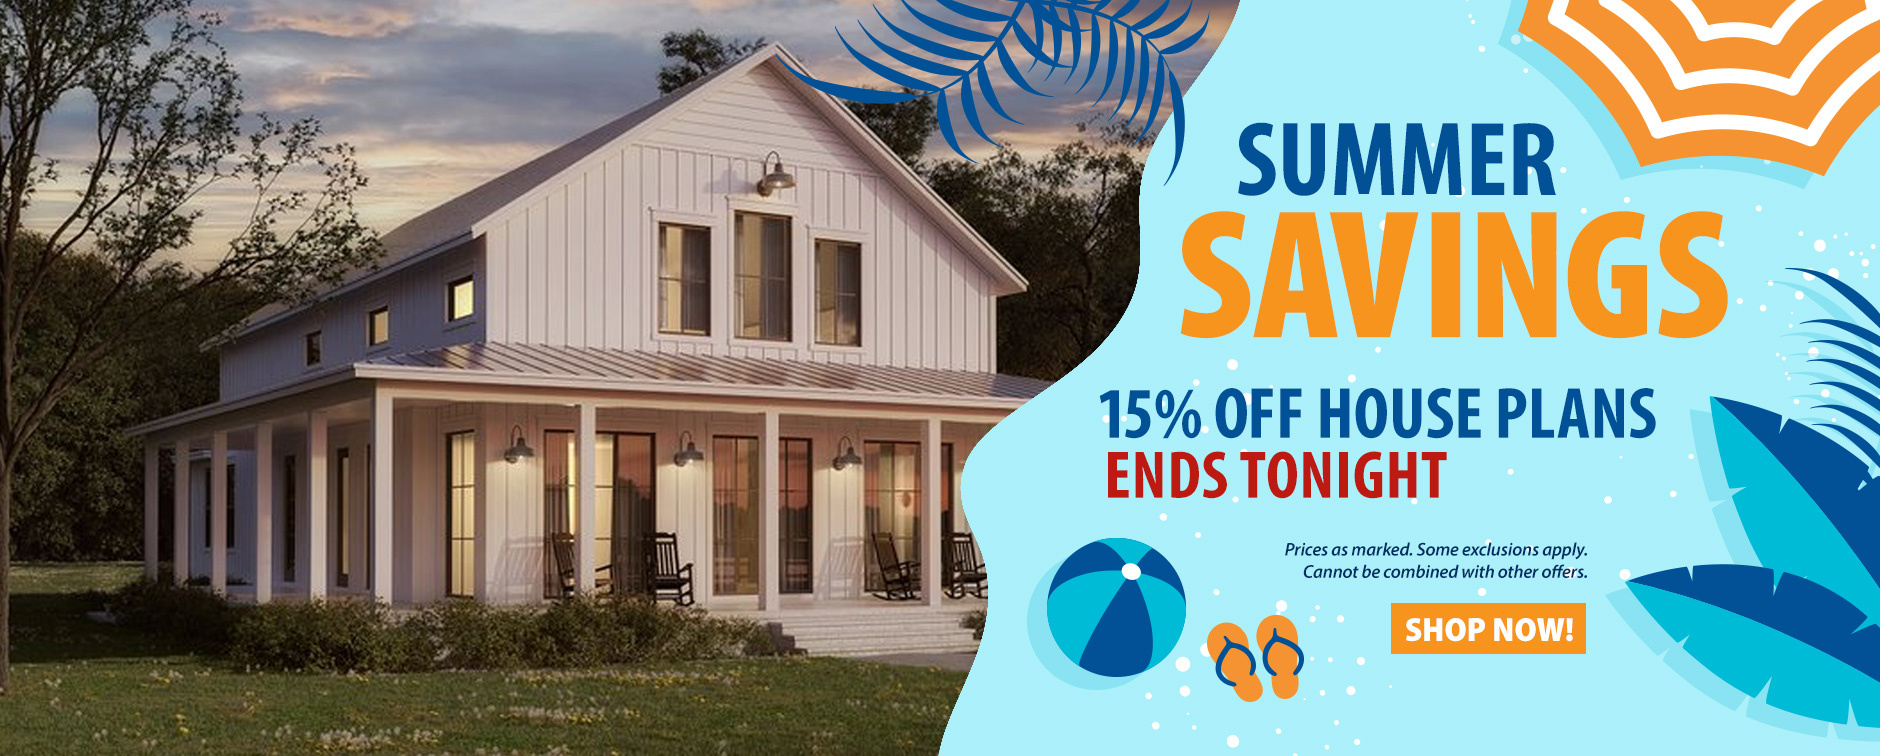 House Plan Sale Ends Tonight. Take 15% Off Home Designs Now.